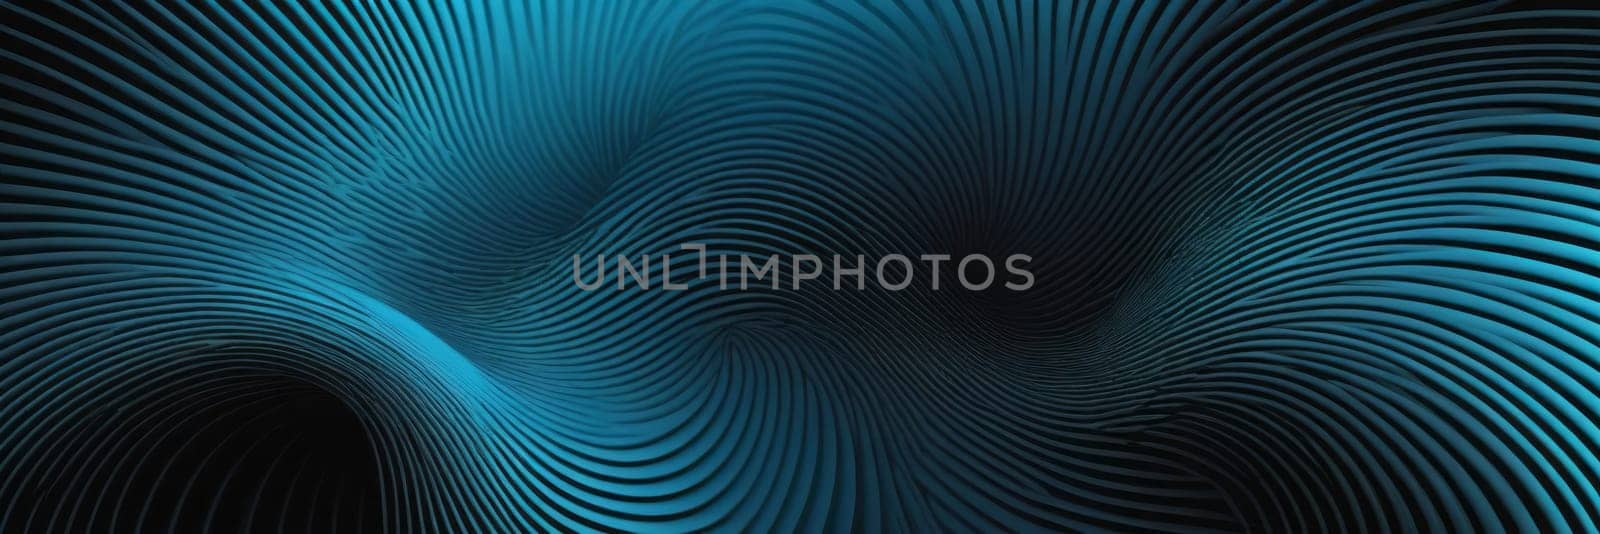 Toroidal Shapes in Black and Powder blue by nkotlyar